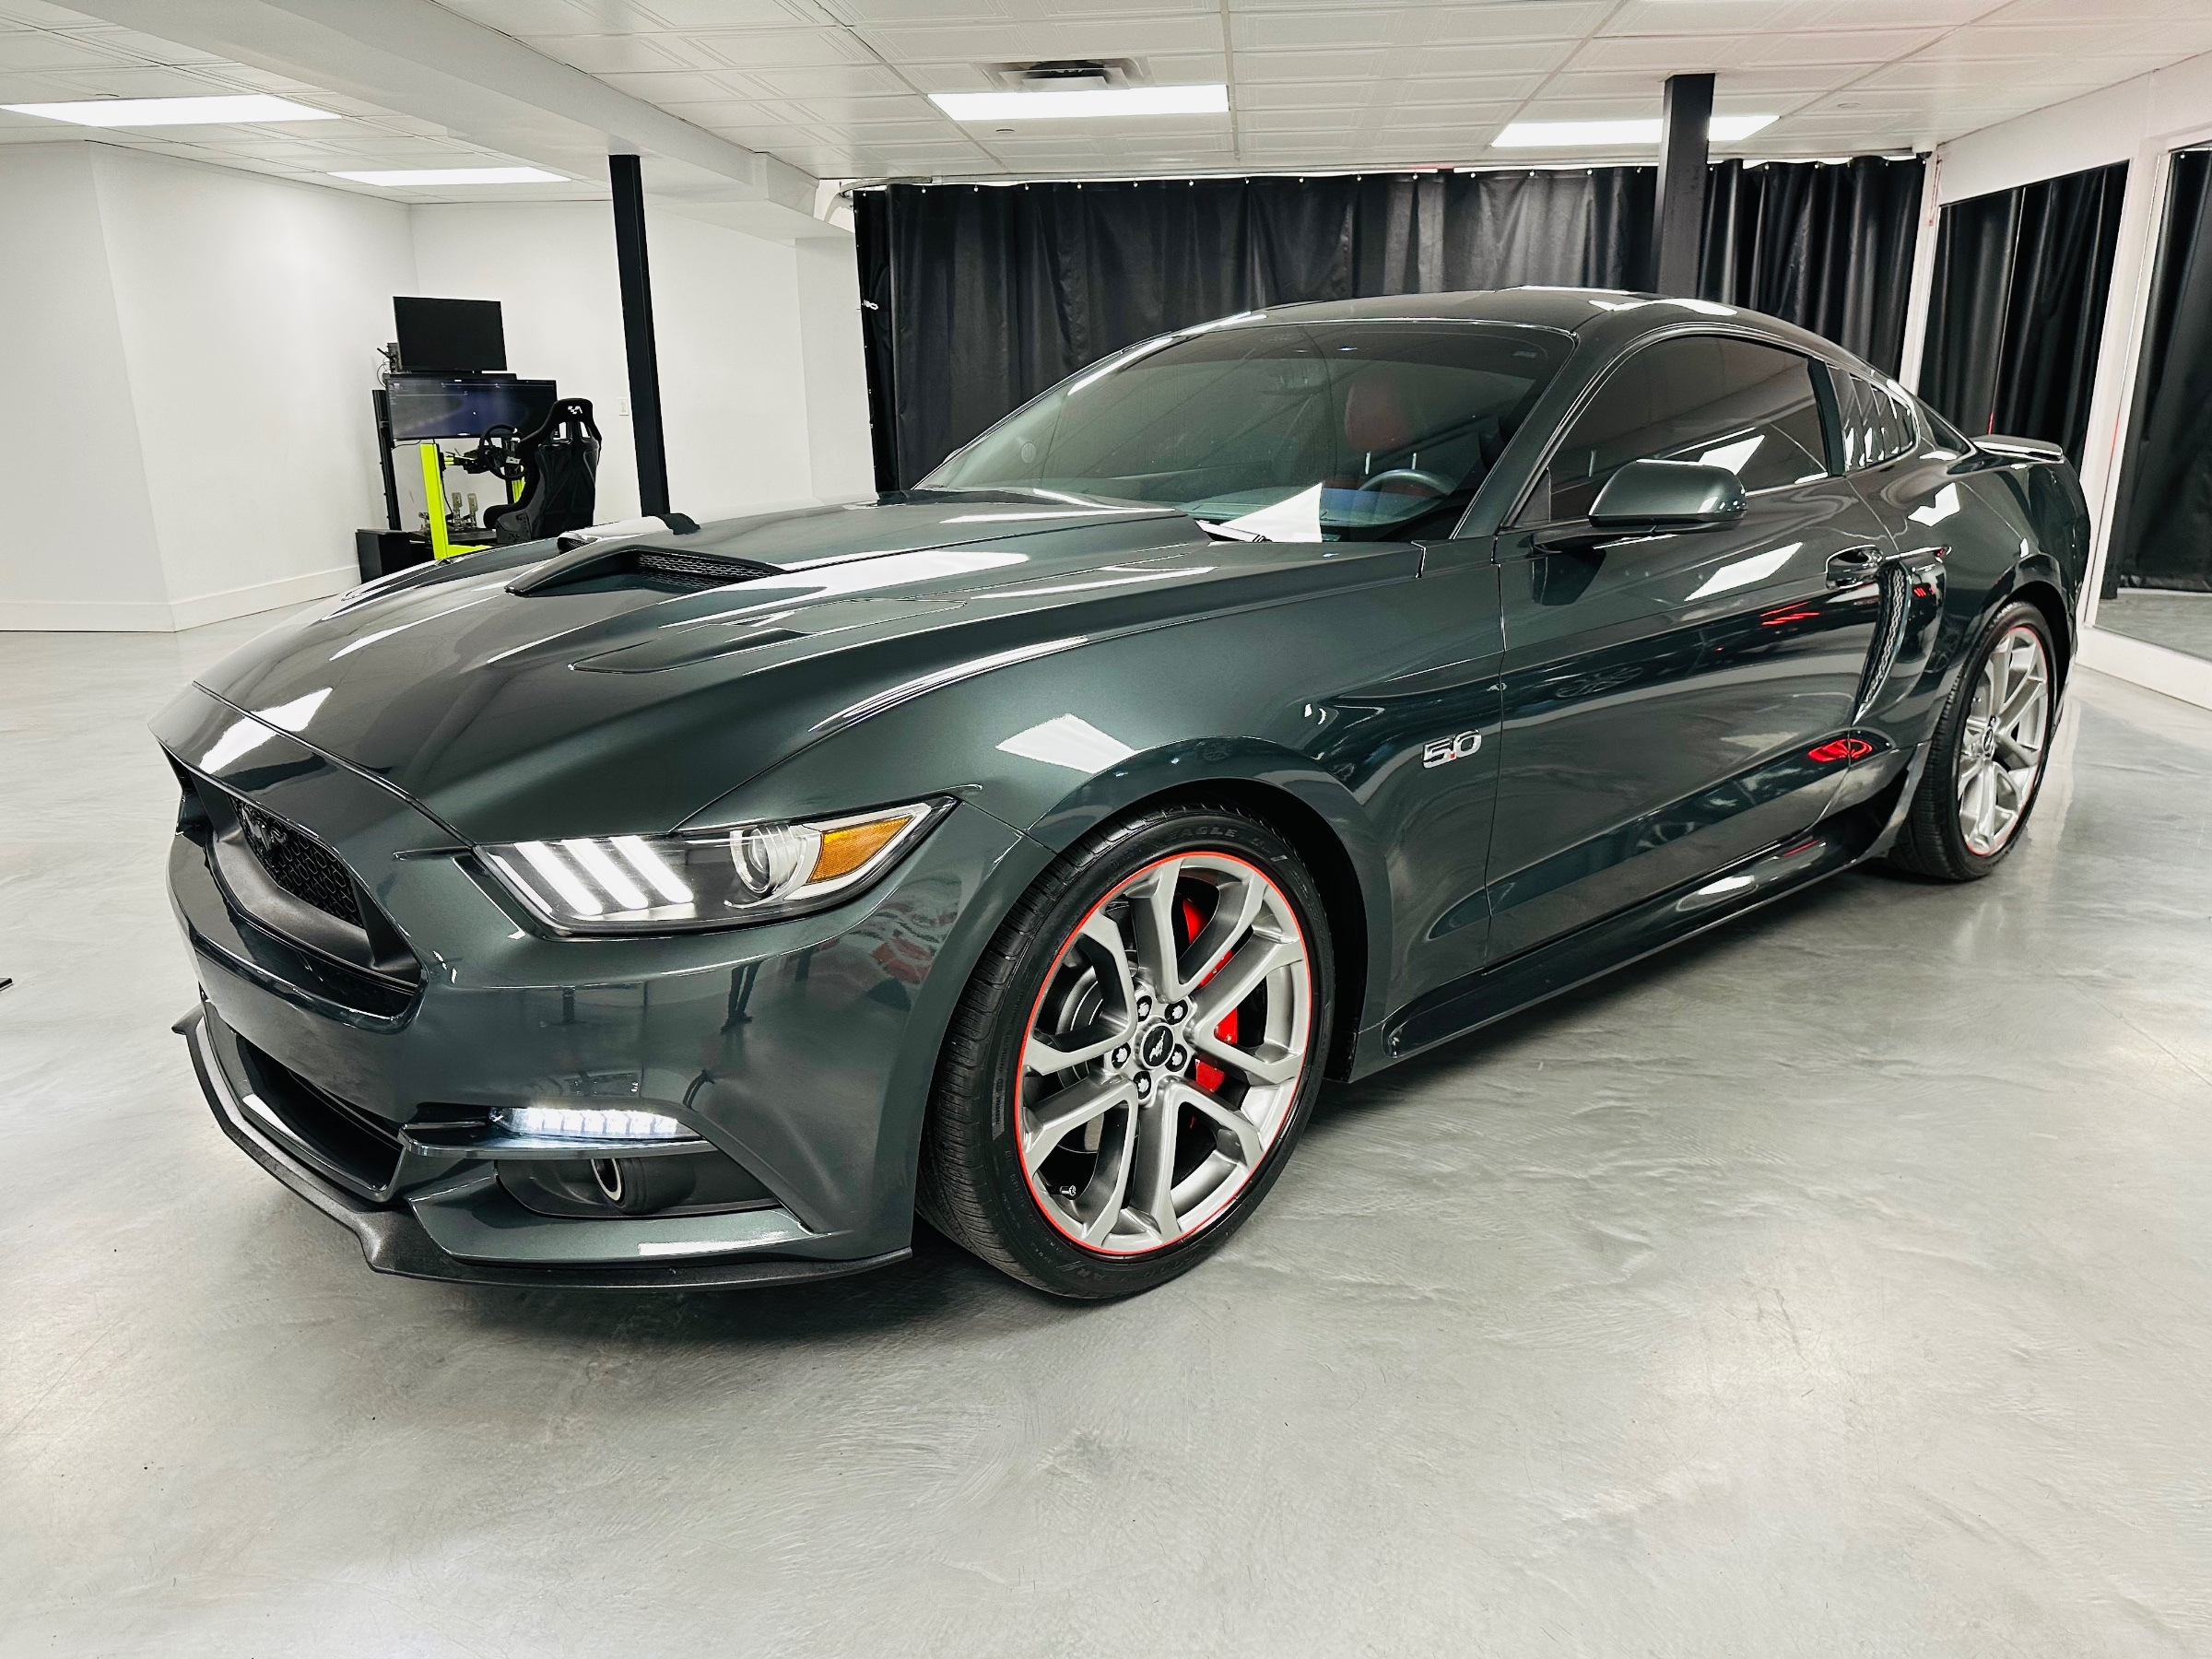 2015 Ford Mustang GT 50IEME ANNIVERSAIRE 5.0L